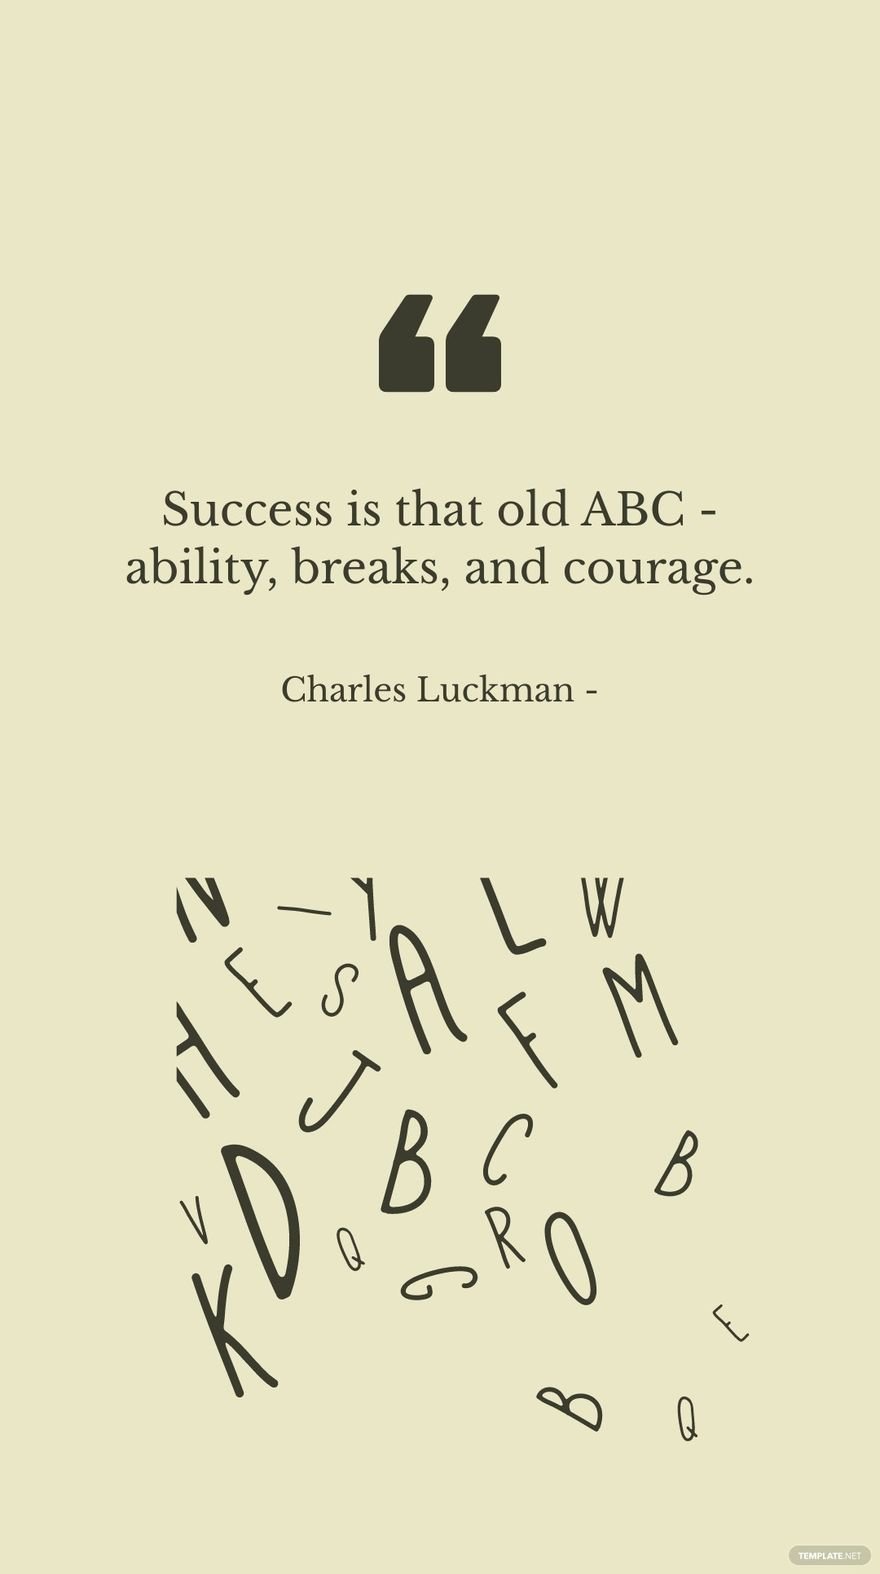 Free Charles Luckman - Success is that old ABC - ability, breaks, and courage. in JPG